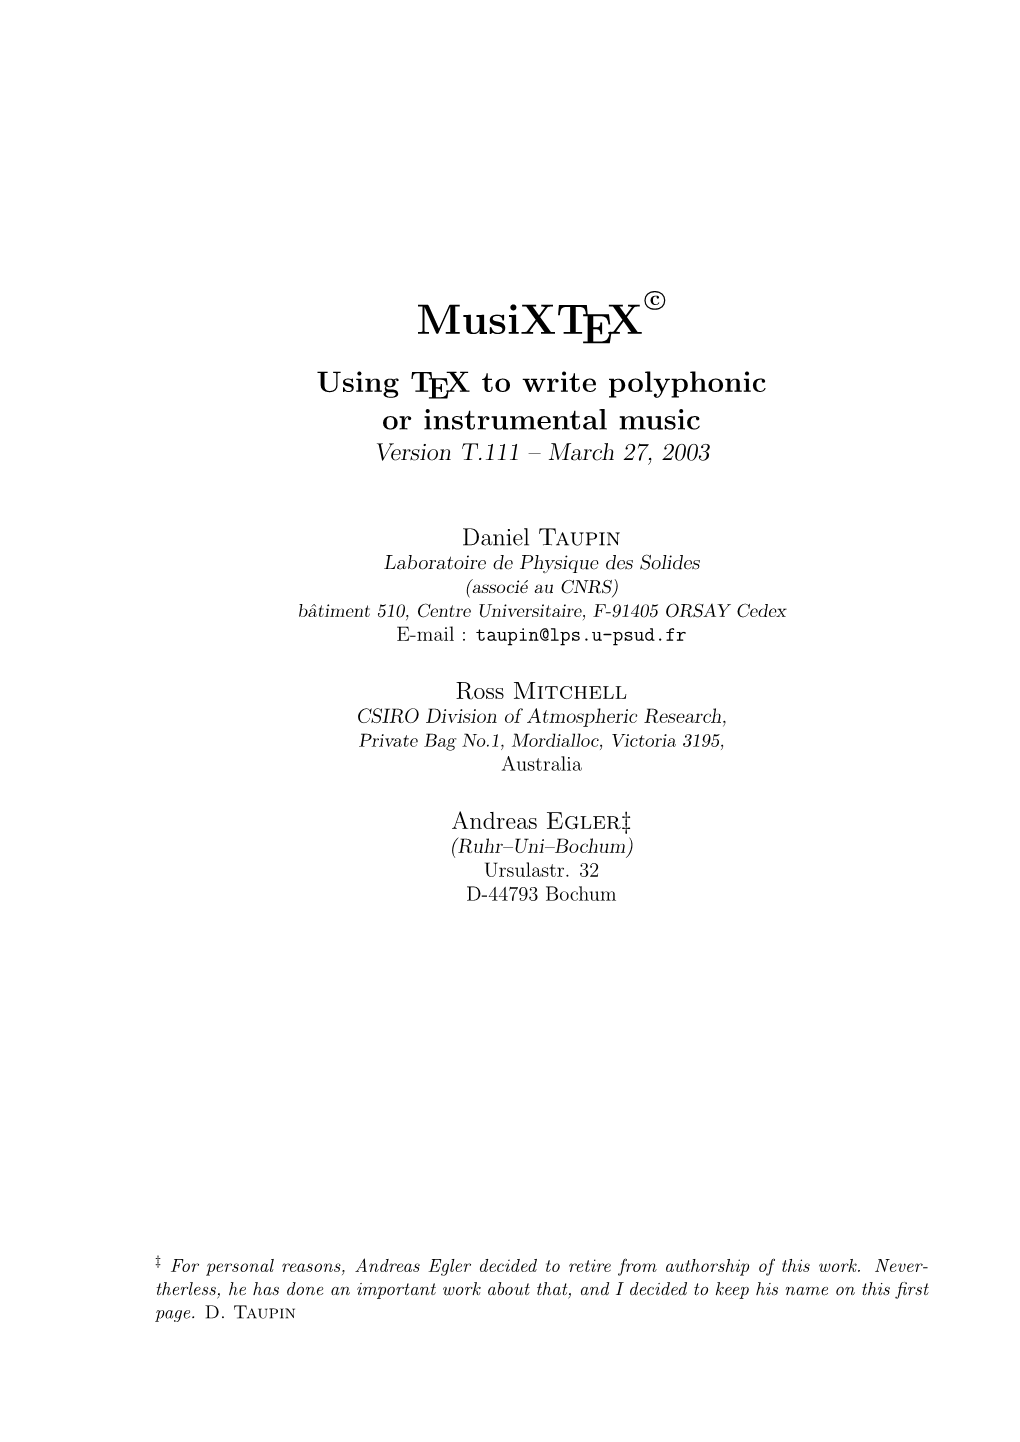 Musixtex Using TEX to Write Polyphonic Or Instrumental Music Version T.111 – March 27, 2003